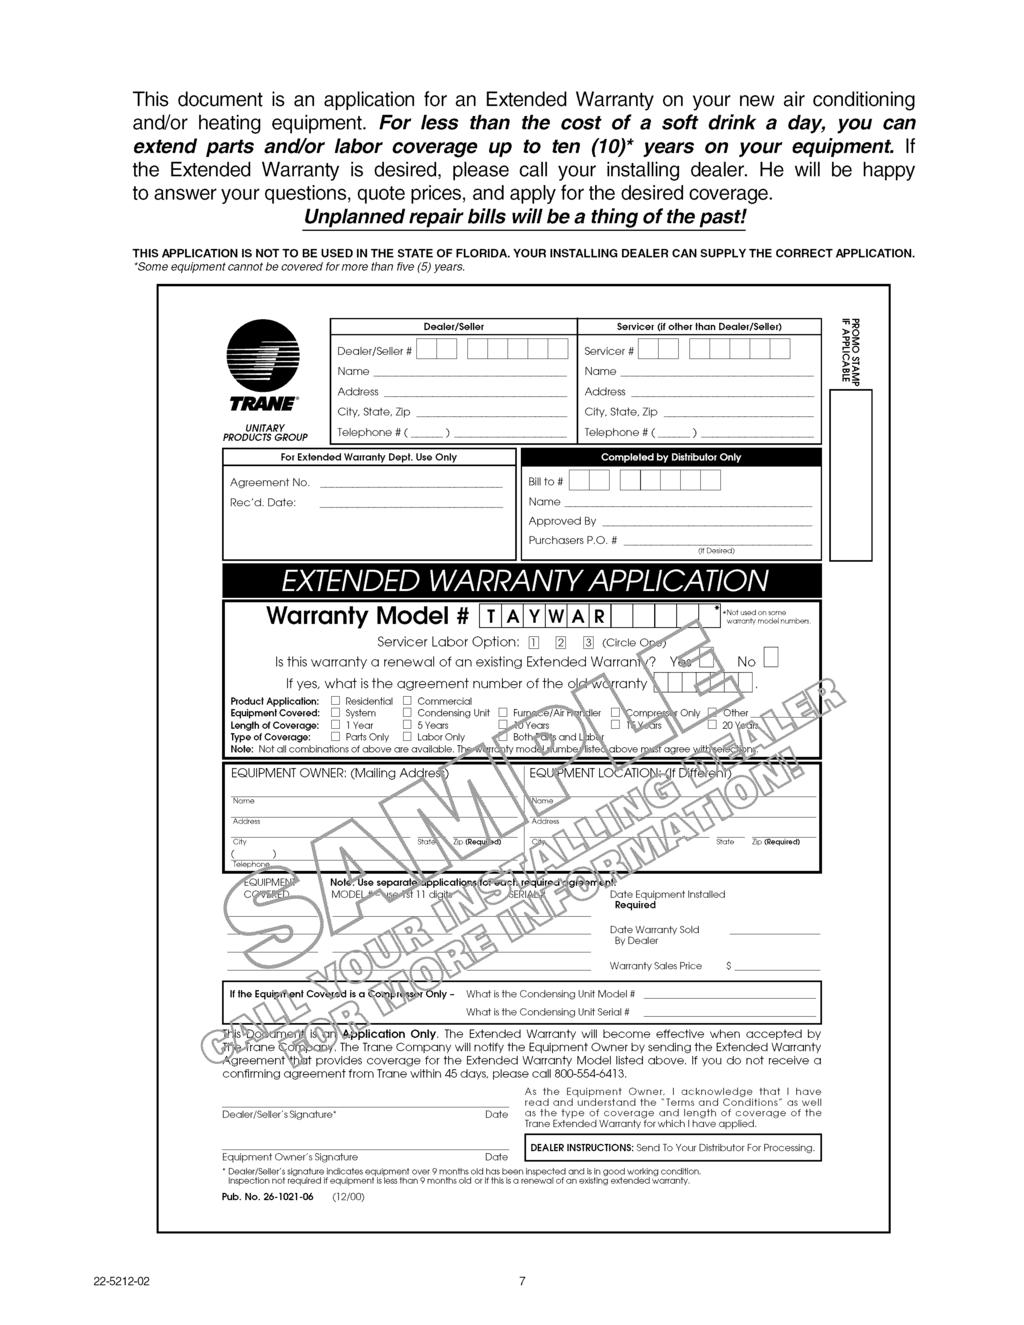 F m q This document is an application for an Extended Warranty on your new air conditioning and/or heating equipment.